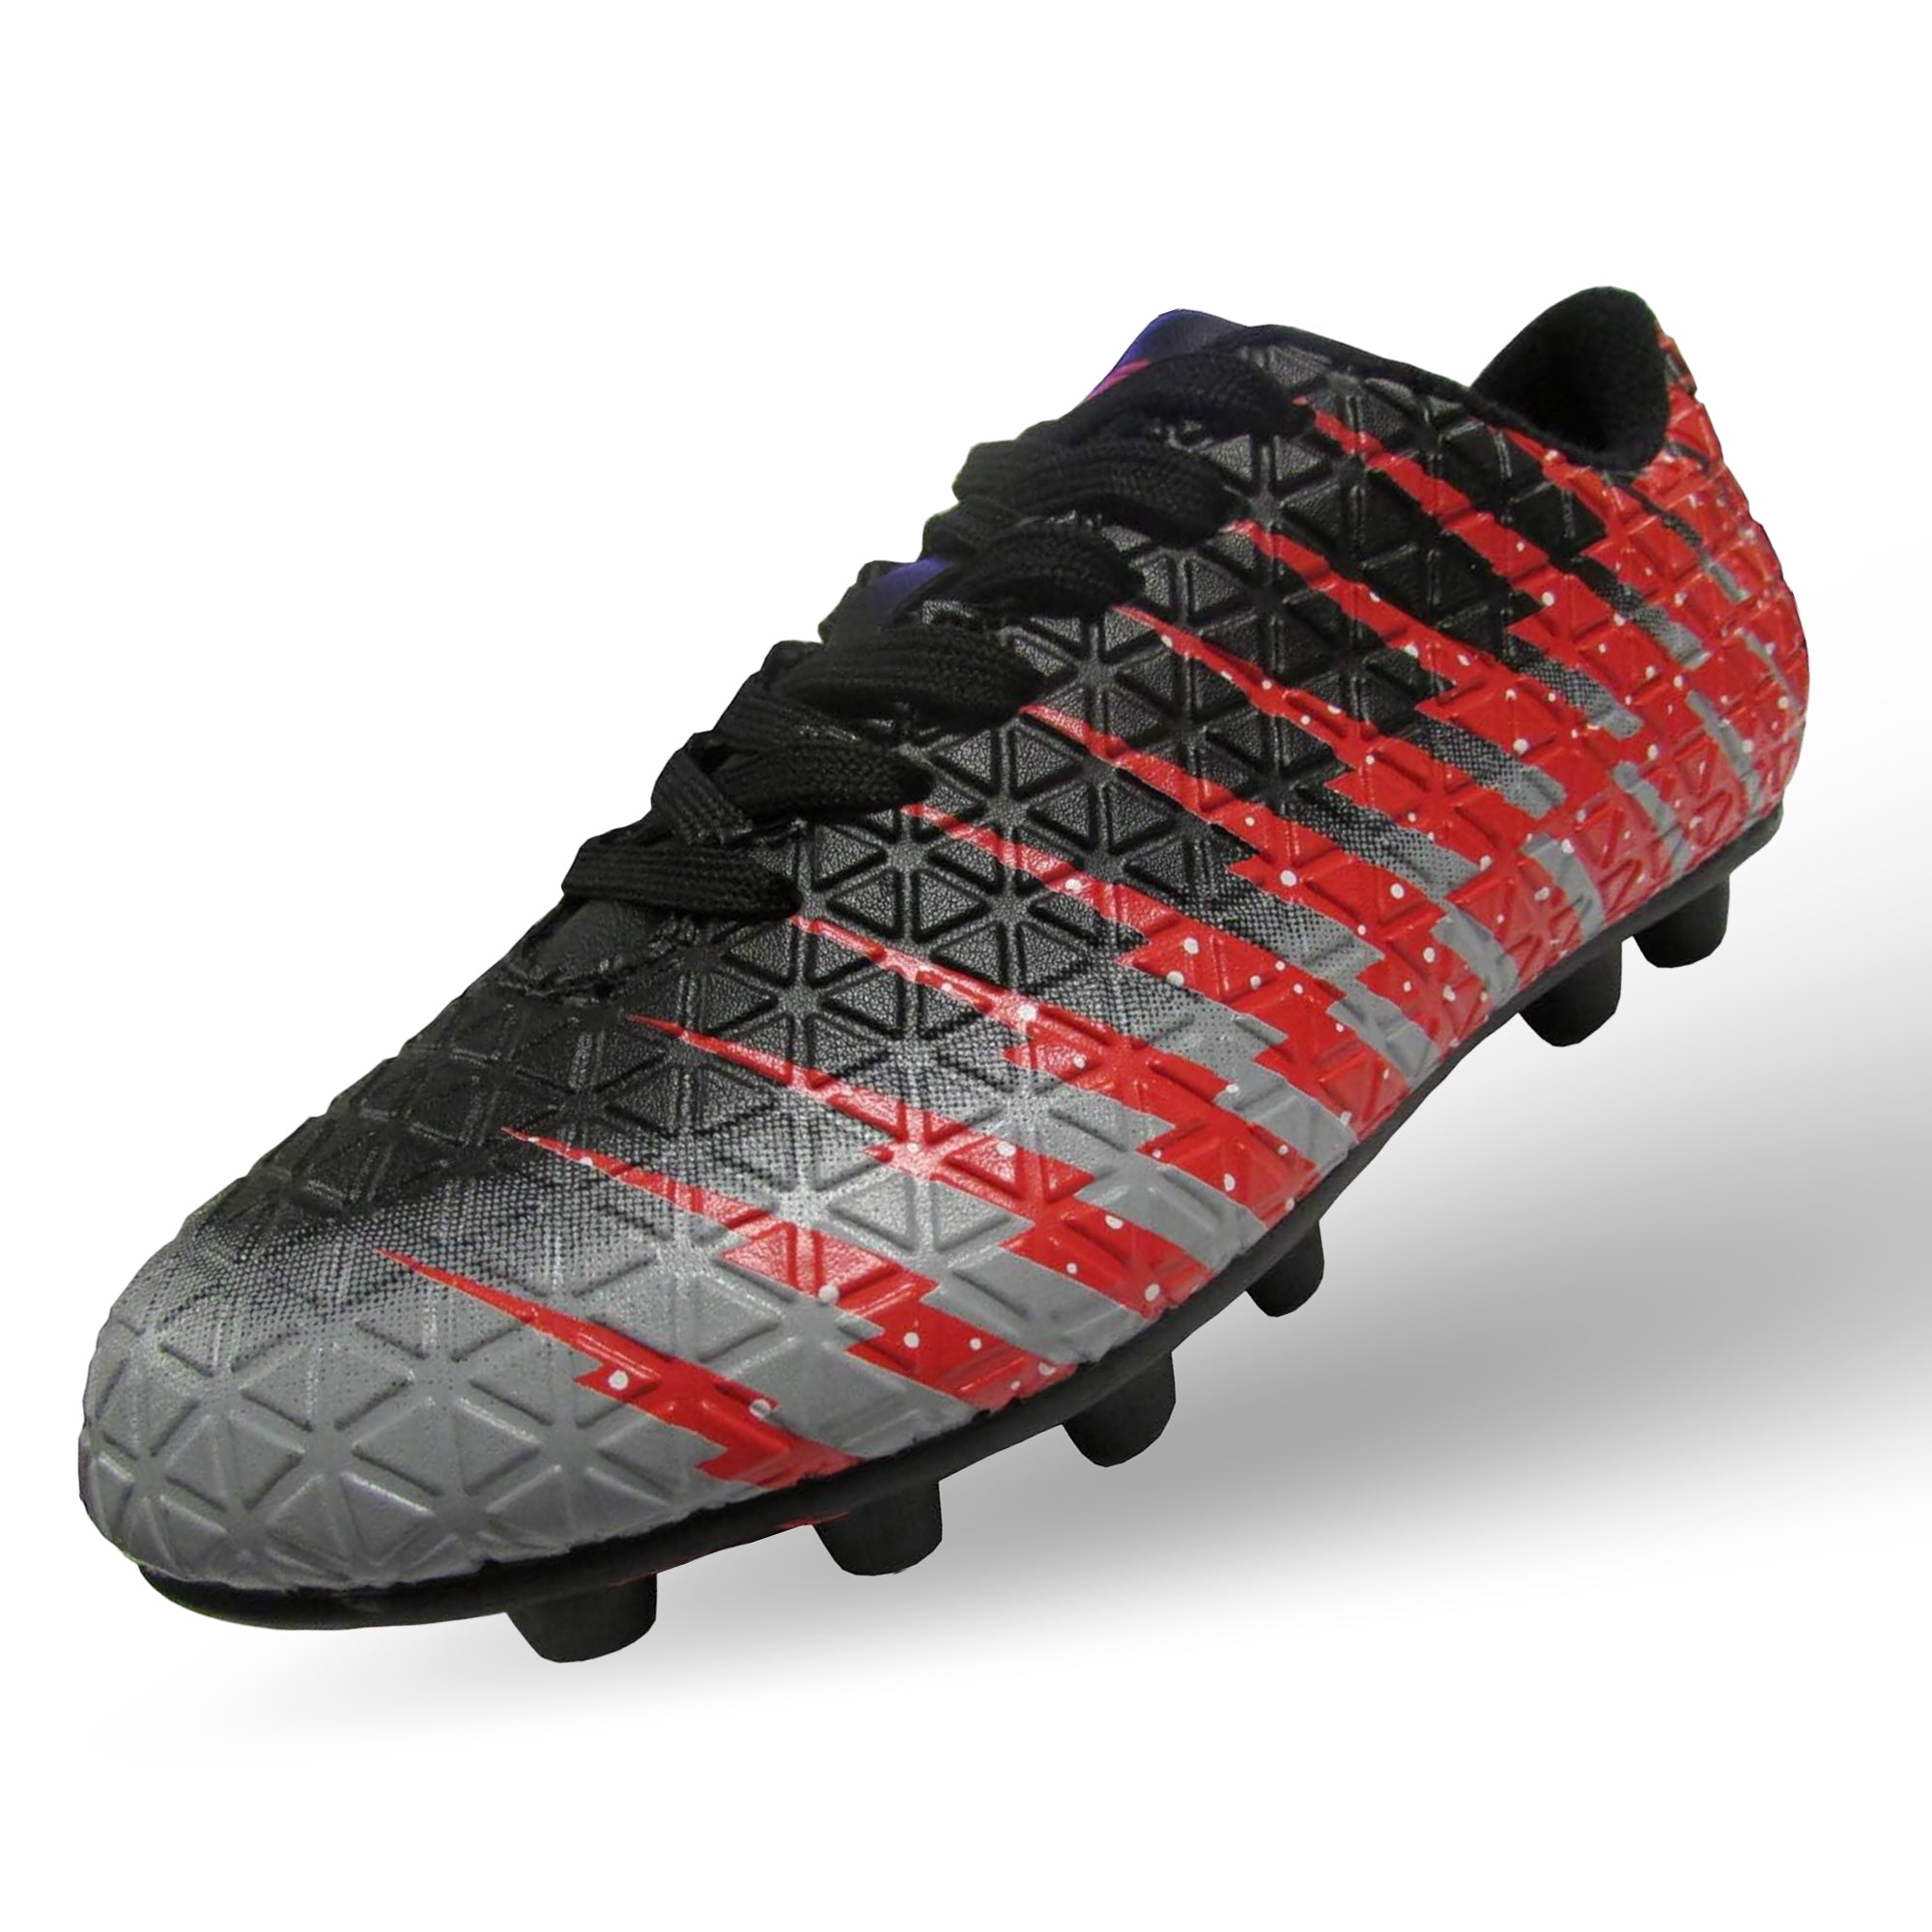 Bolt Firm Ground Soccer Shoes-Black/Red/Silver